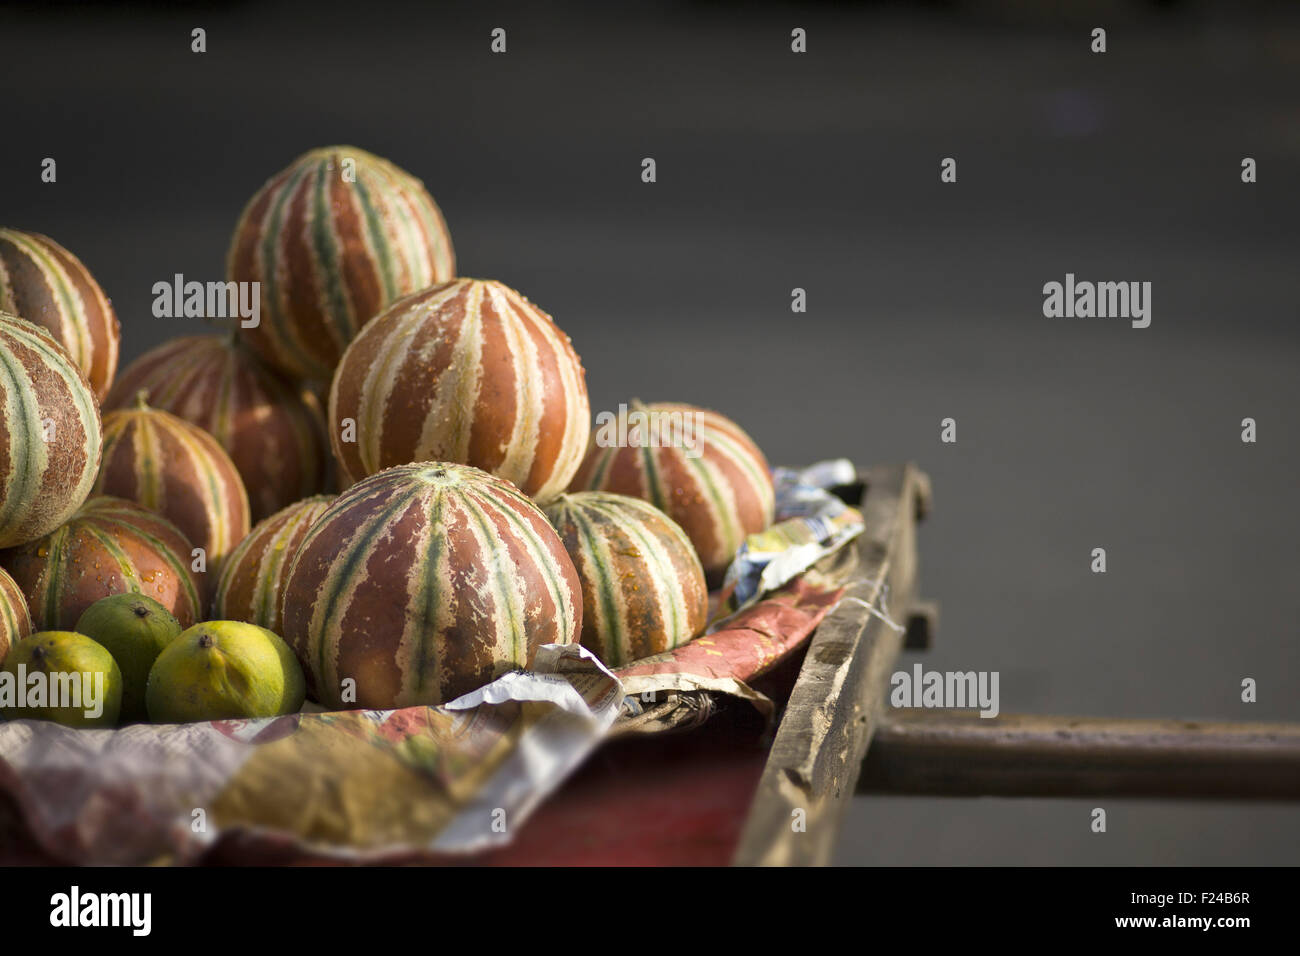 Melons sold on the Indian streets Stock Photo